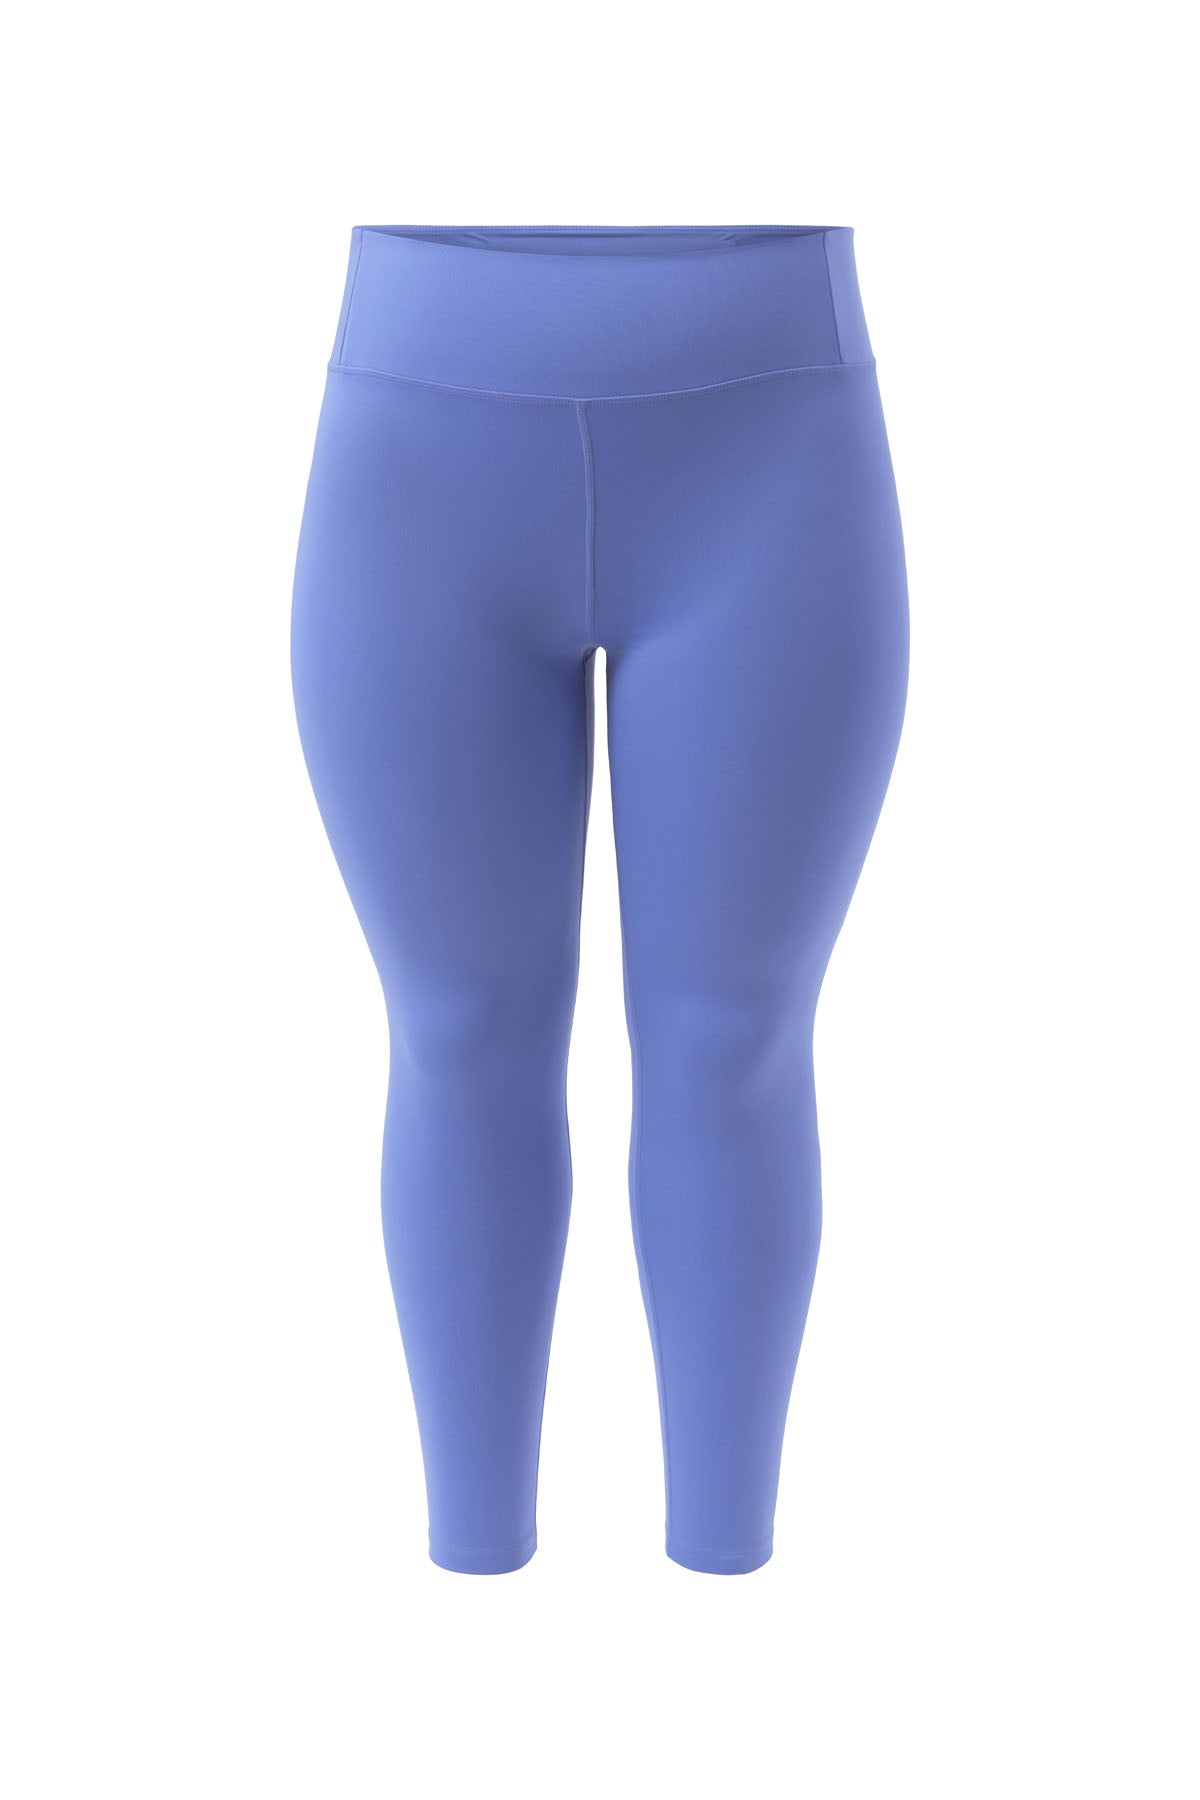 Under Armour WAIST BAND POCKET NAVY PEACH WOMENS XS COMPRESSION LEGGINGS -  $14 - From allison